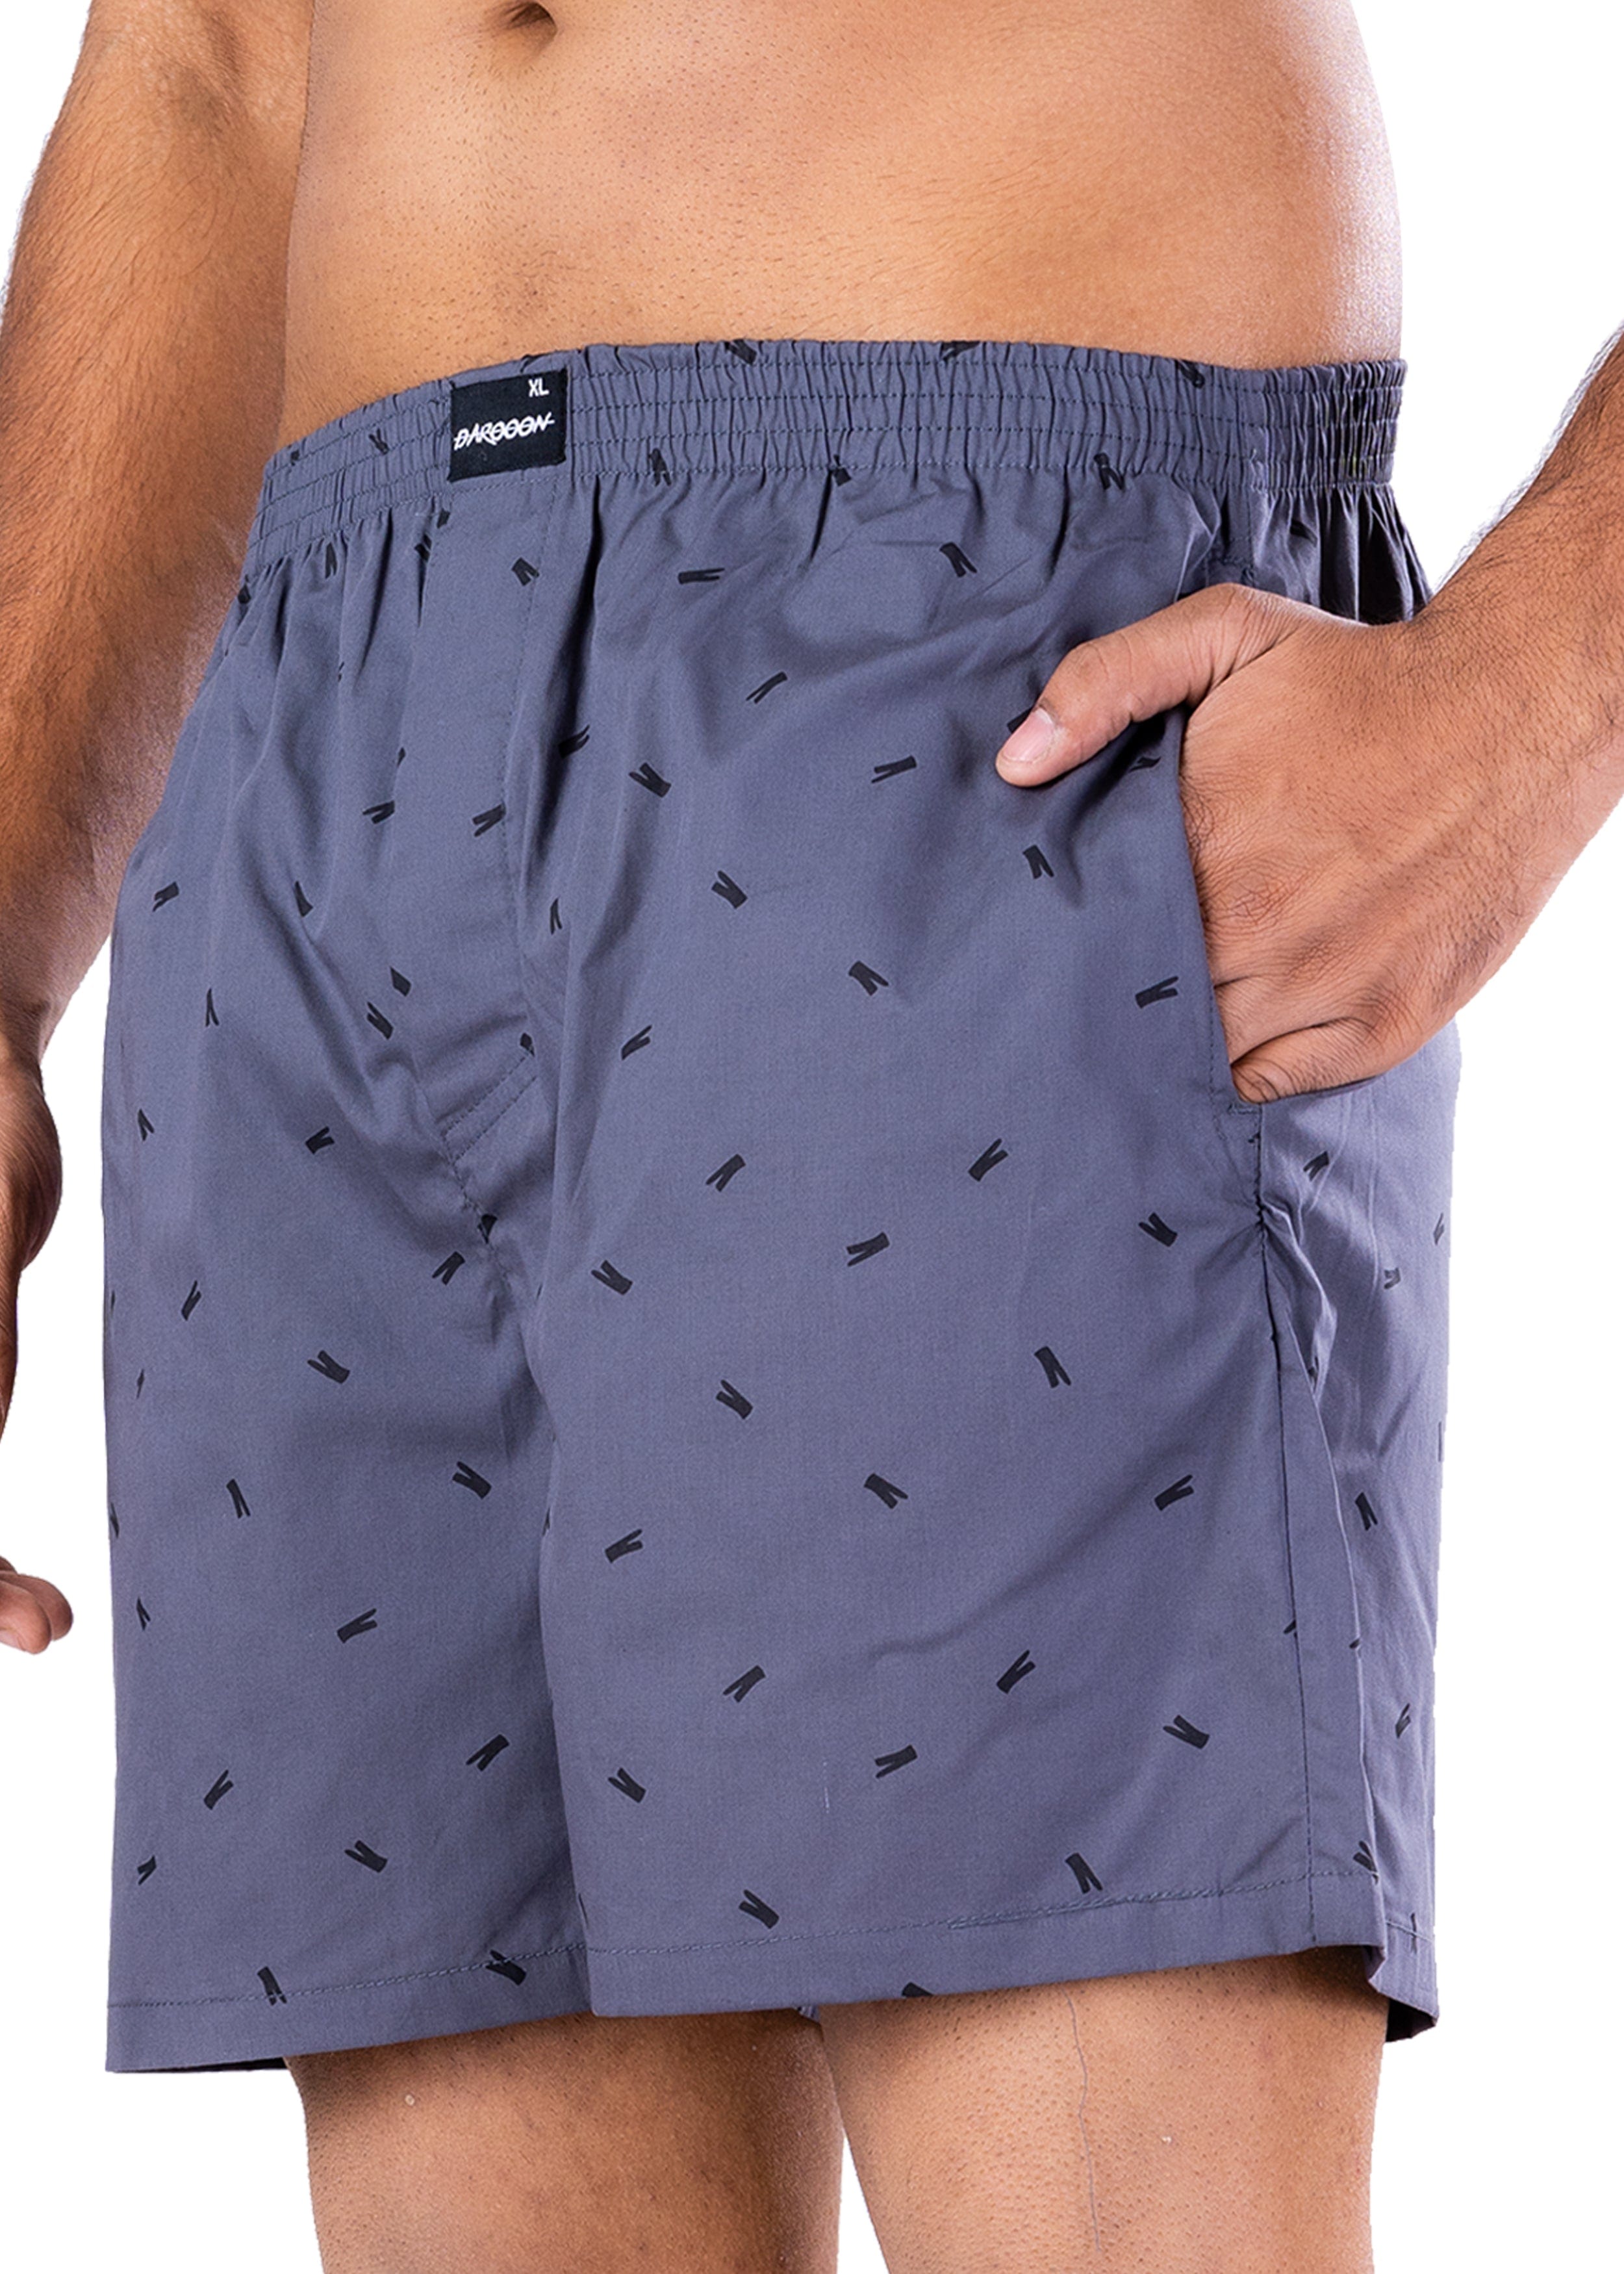 Abstract Pattern Printed Grey Cotton Boxer For Men